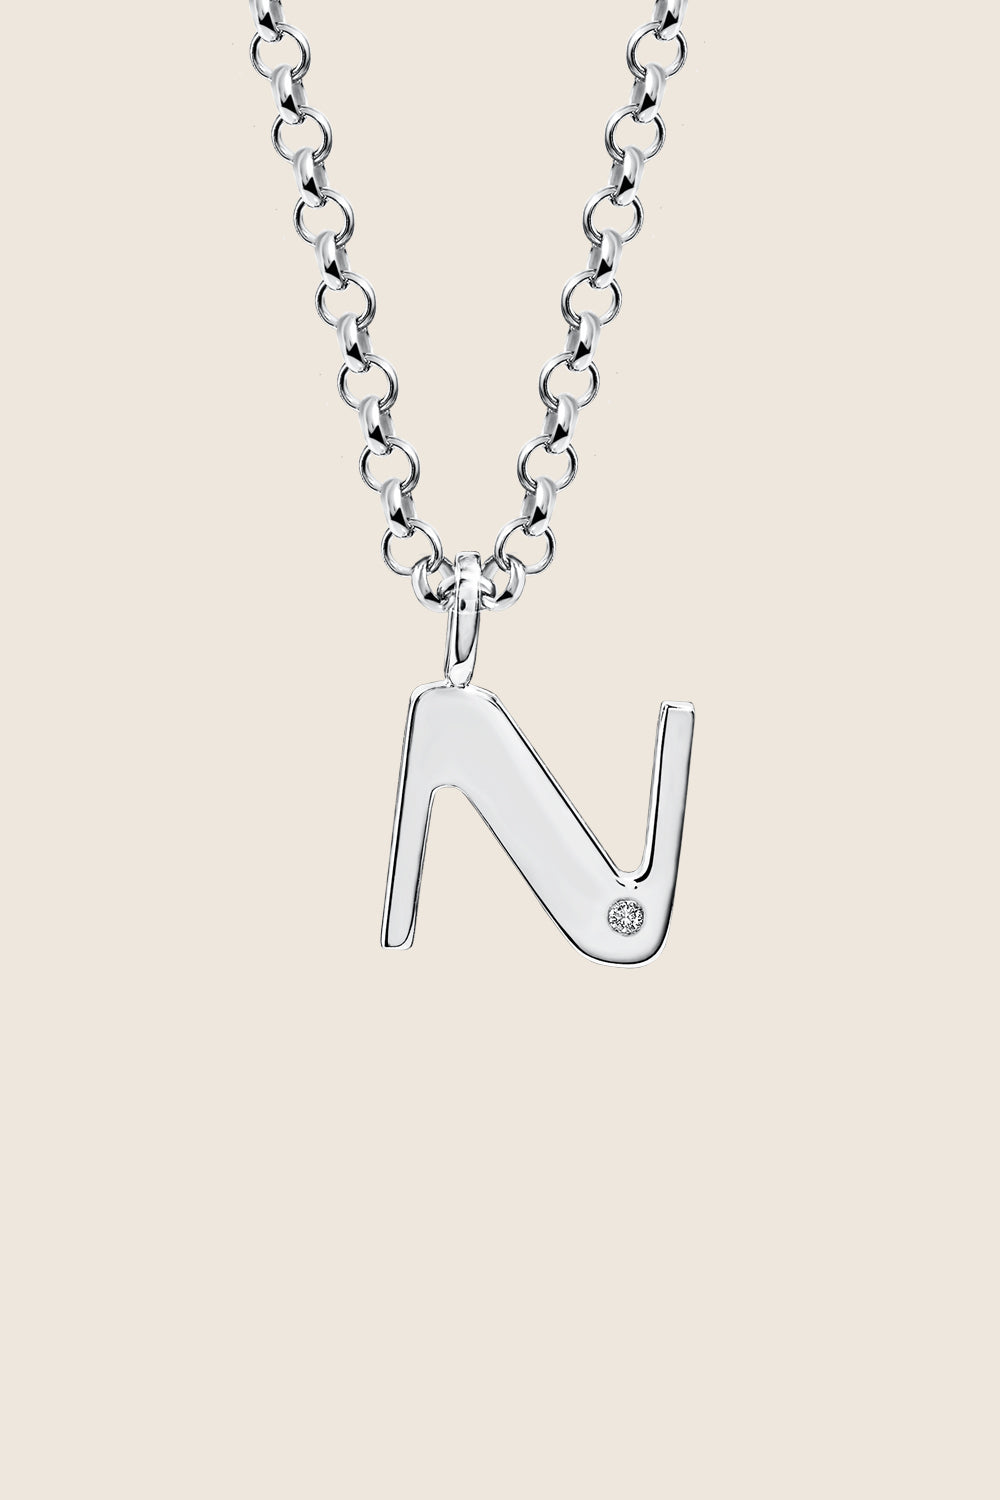 N necklace